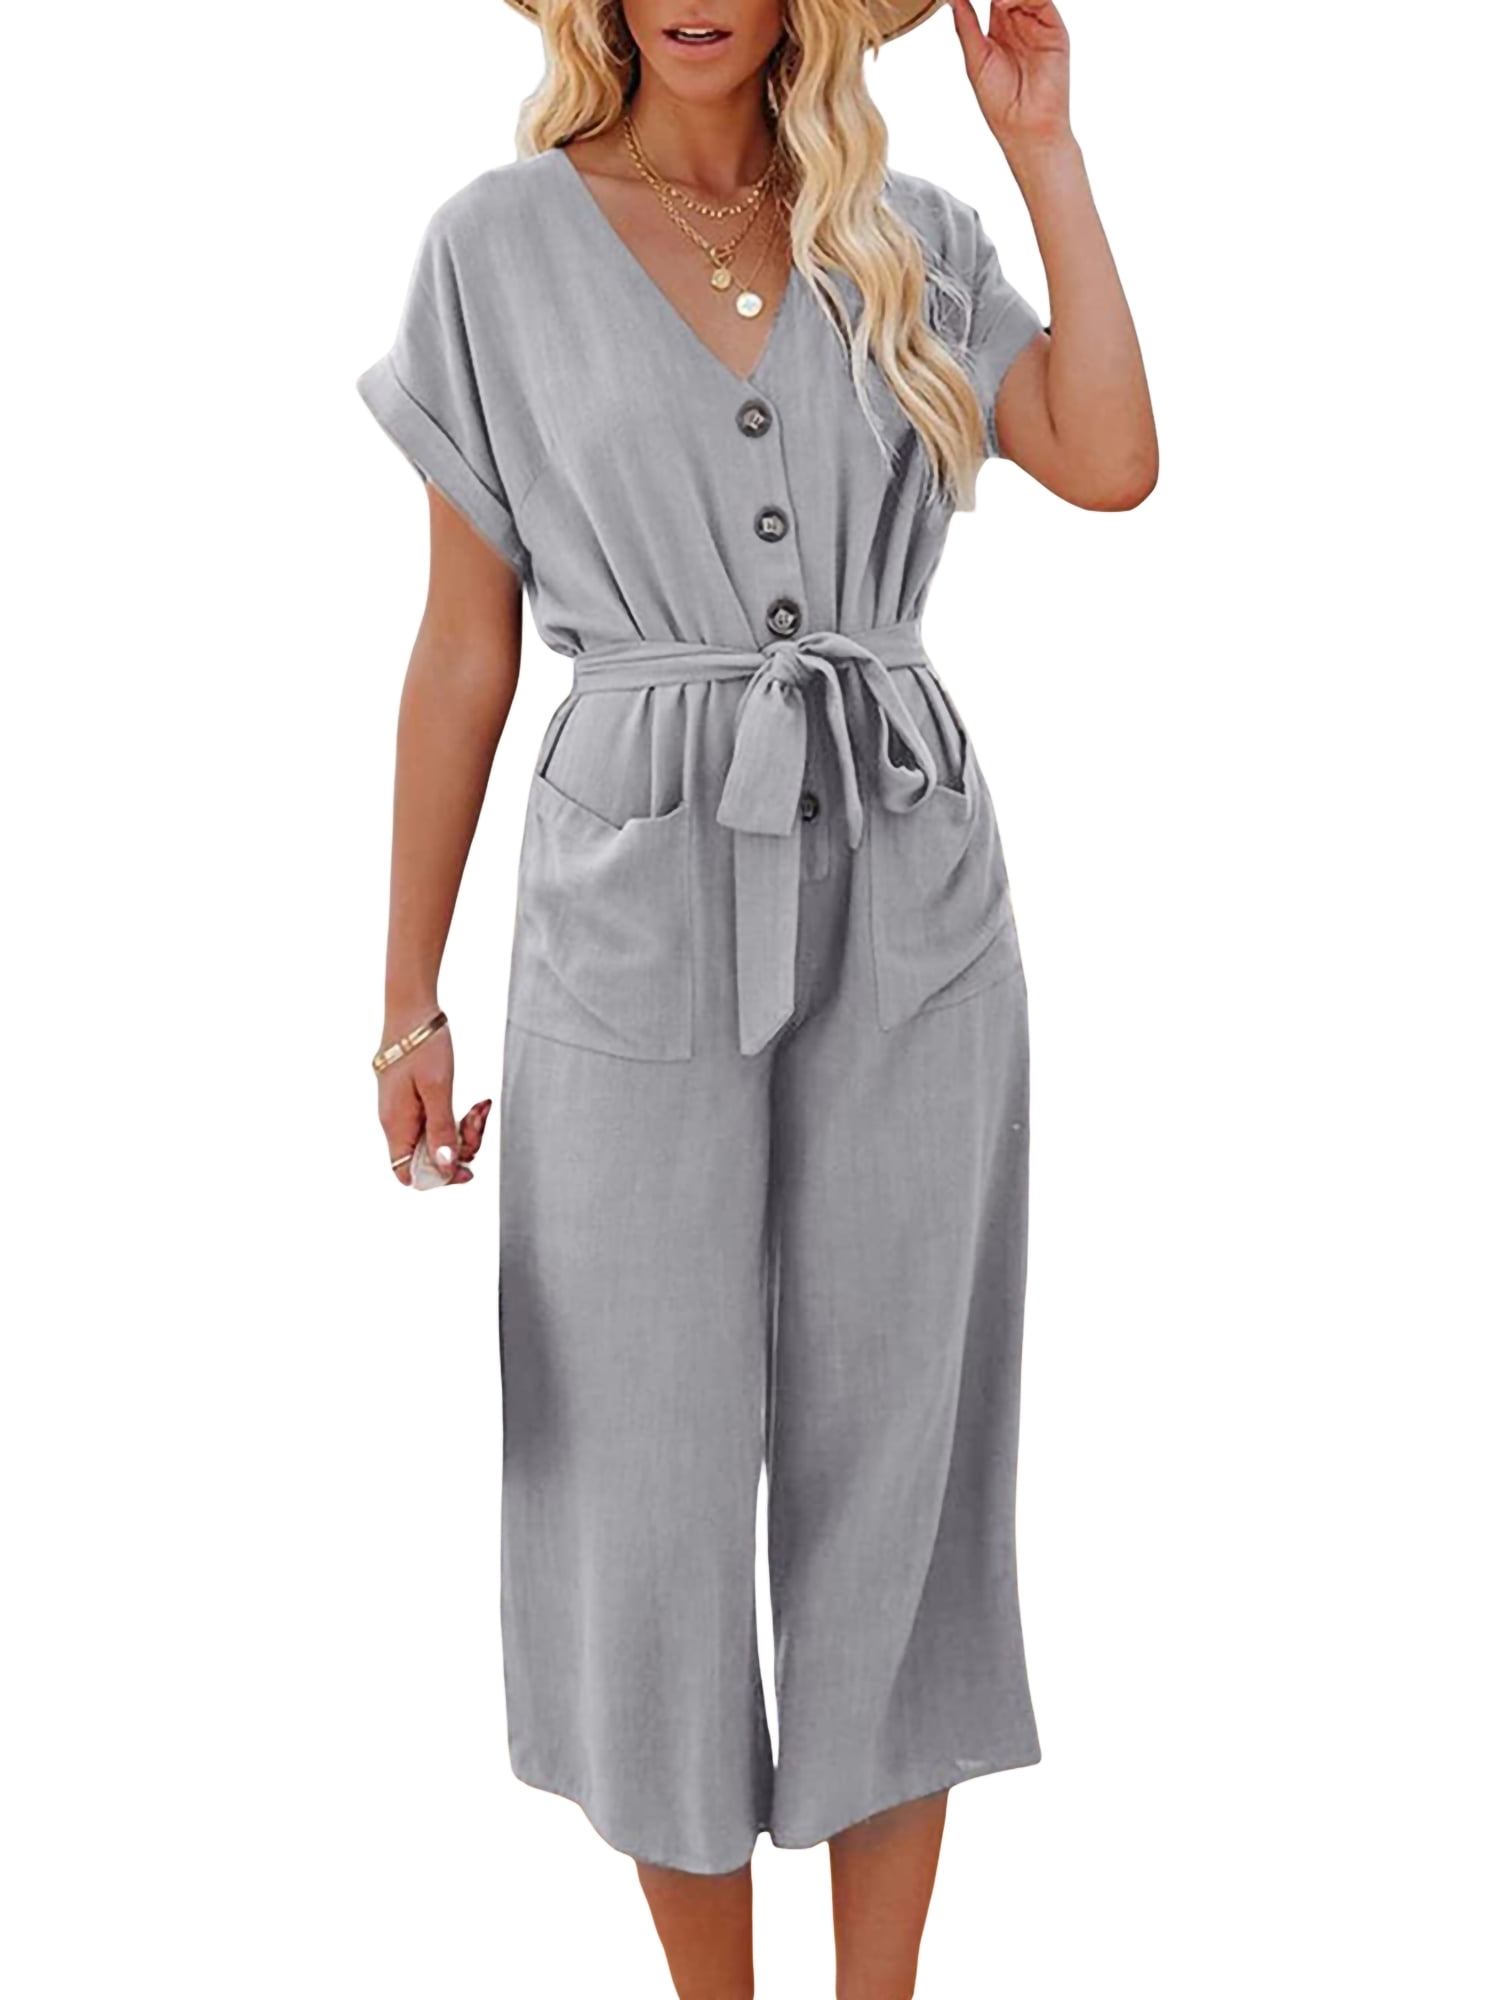 Huilaibazo Slim Fit Jumpsuit Women V Neck Dressy Romper Classy Wide Leg  Playsuit Sexy Casual Strappy Waist Up Romper Pants